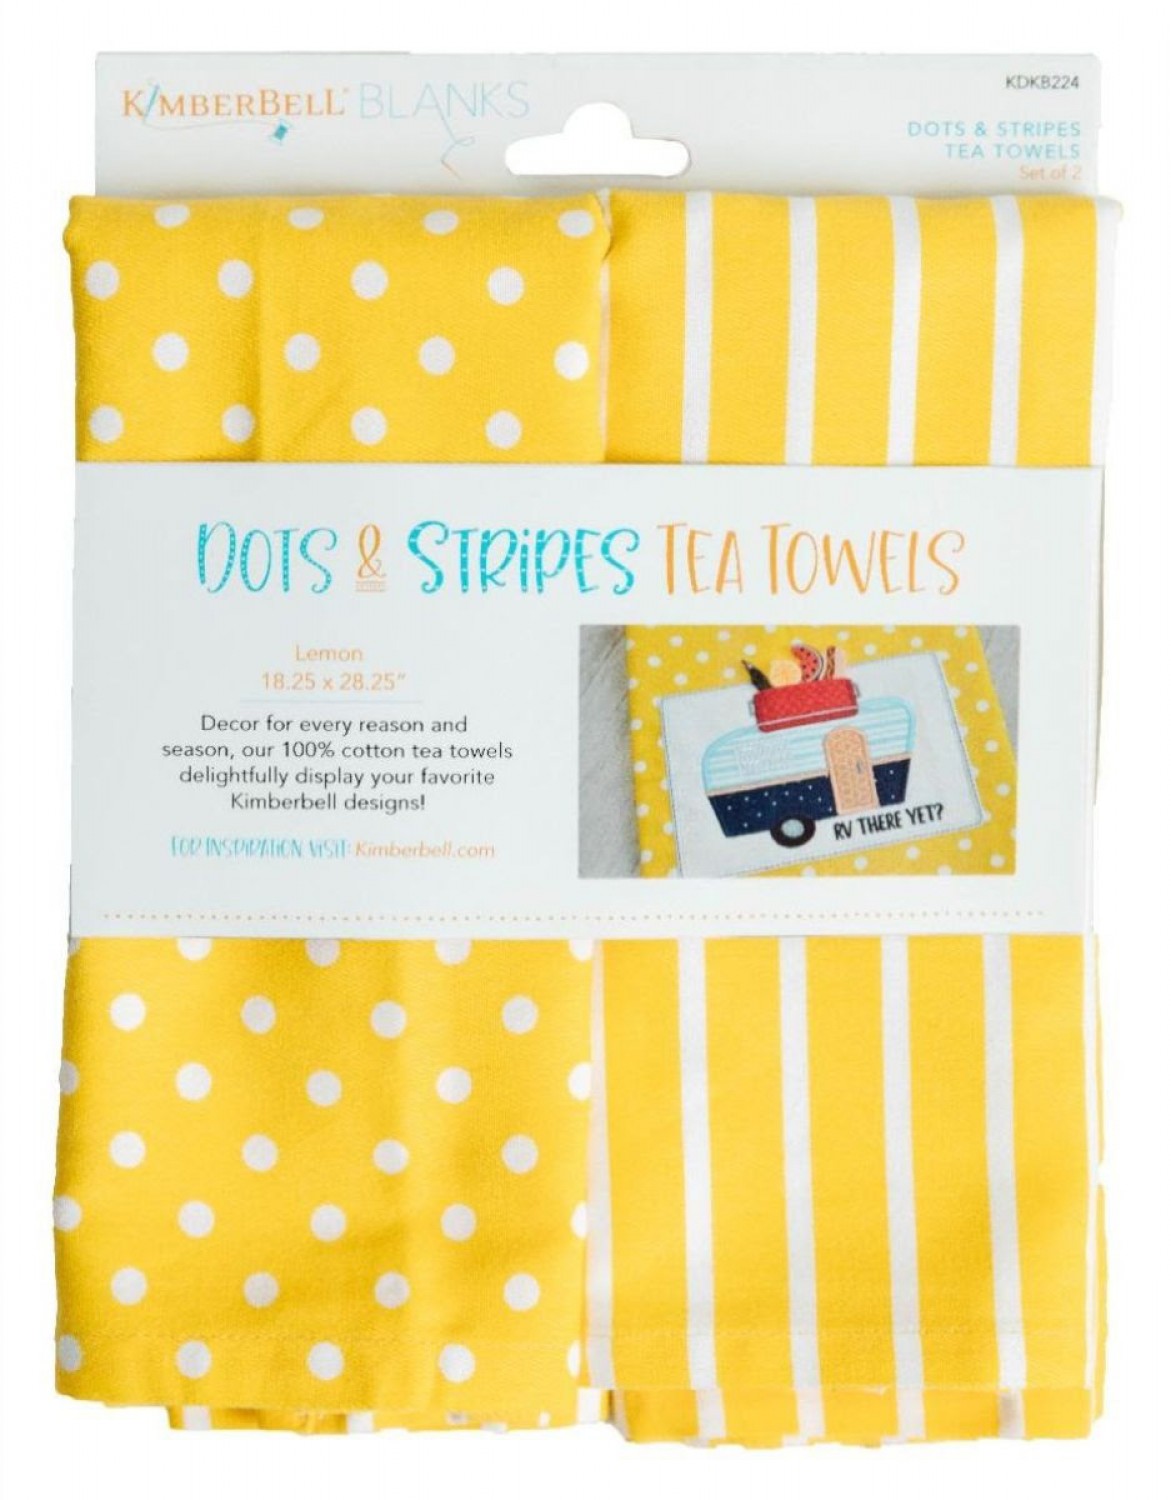 Kimberbell Blanks: Dots and Stripes Tea Towels, Multicolored